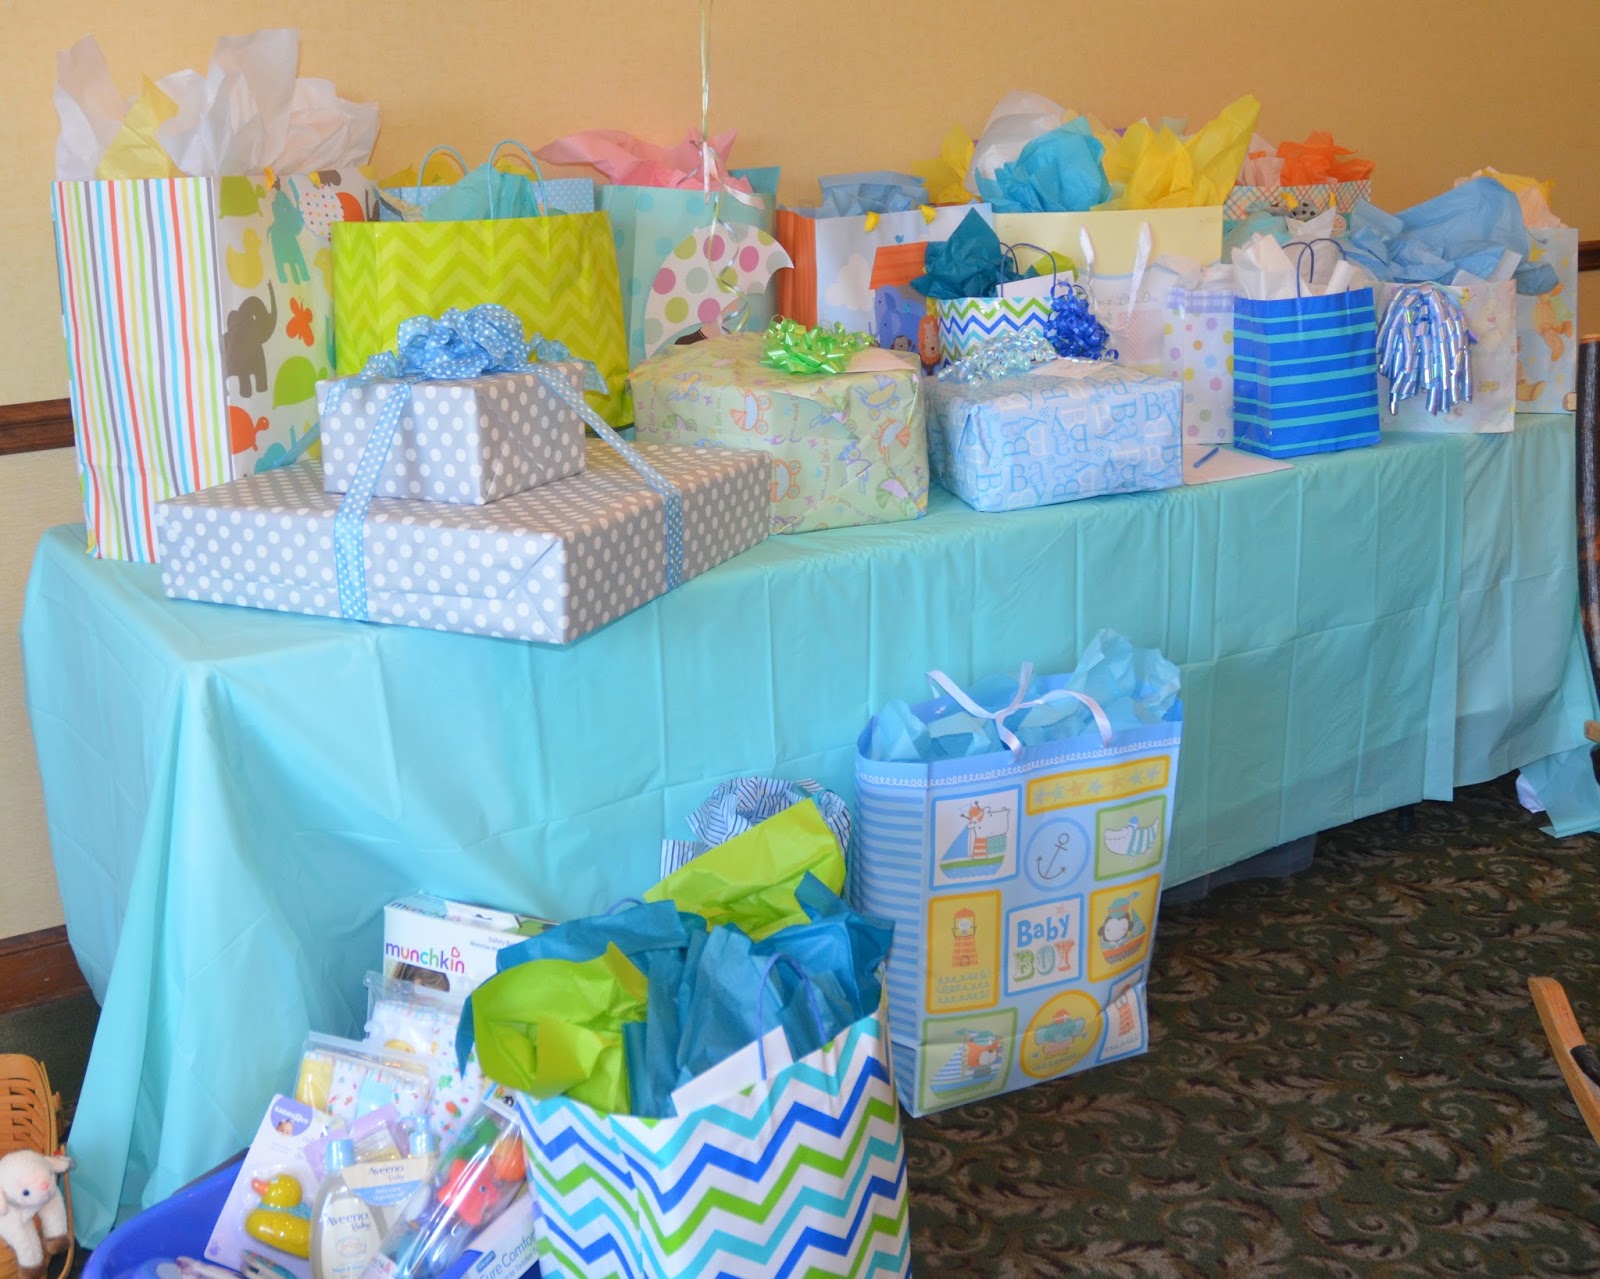 The Sweet Little Southern Charm by Tara Miller: Boy Oh Boy Our Baby Shower